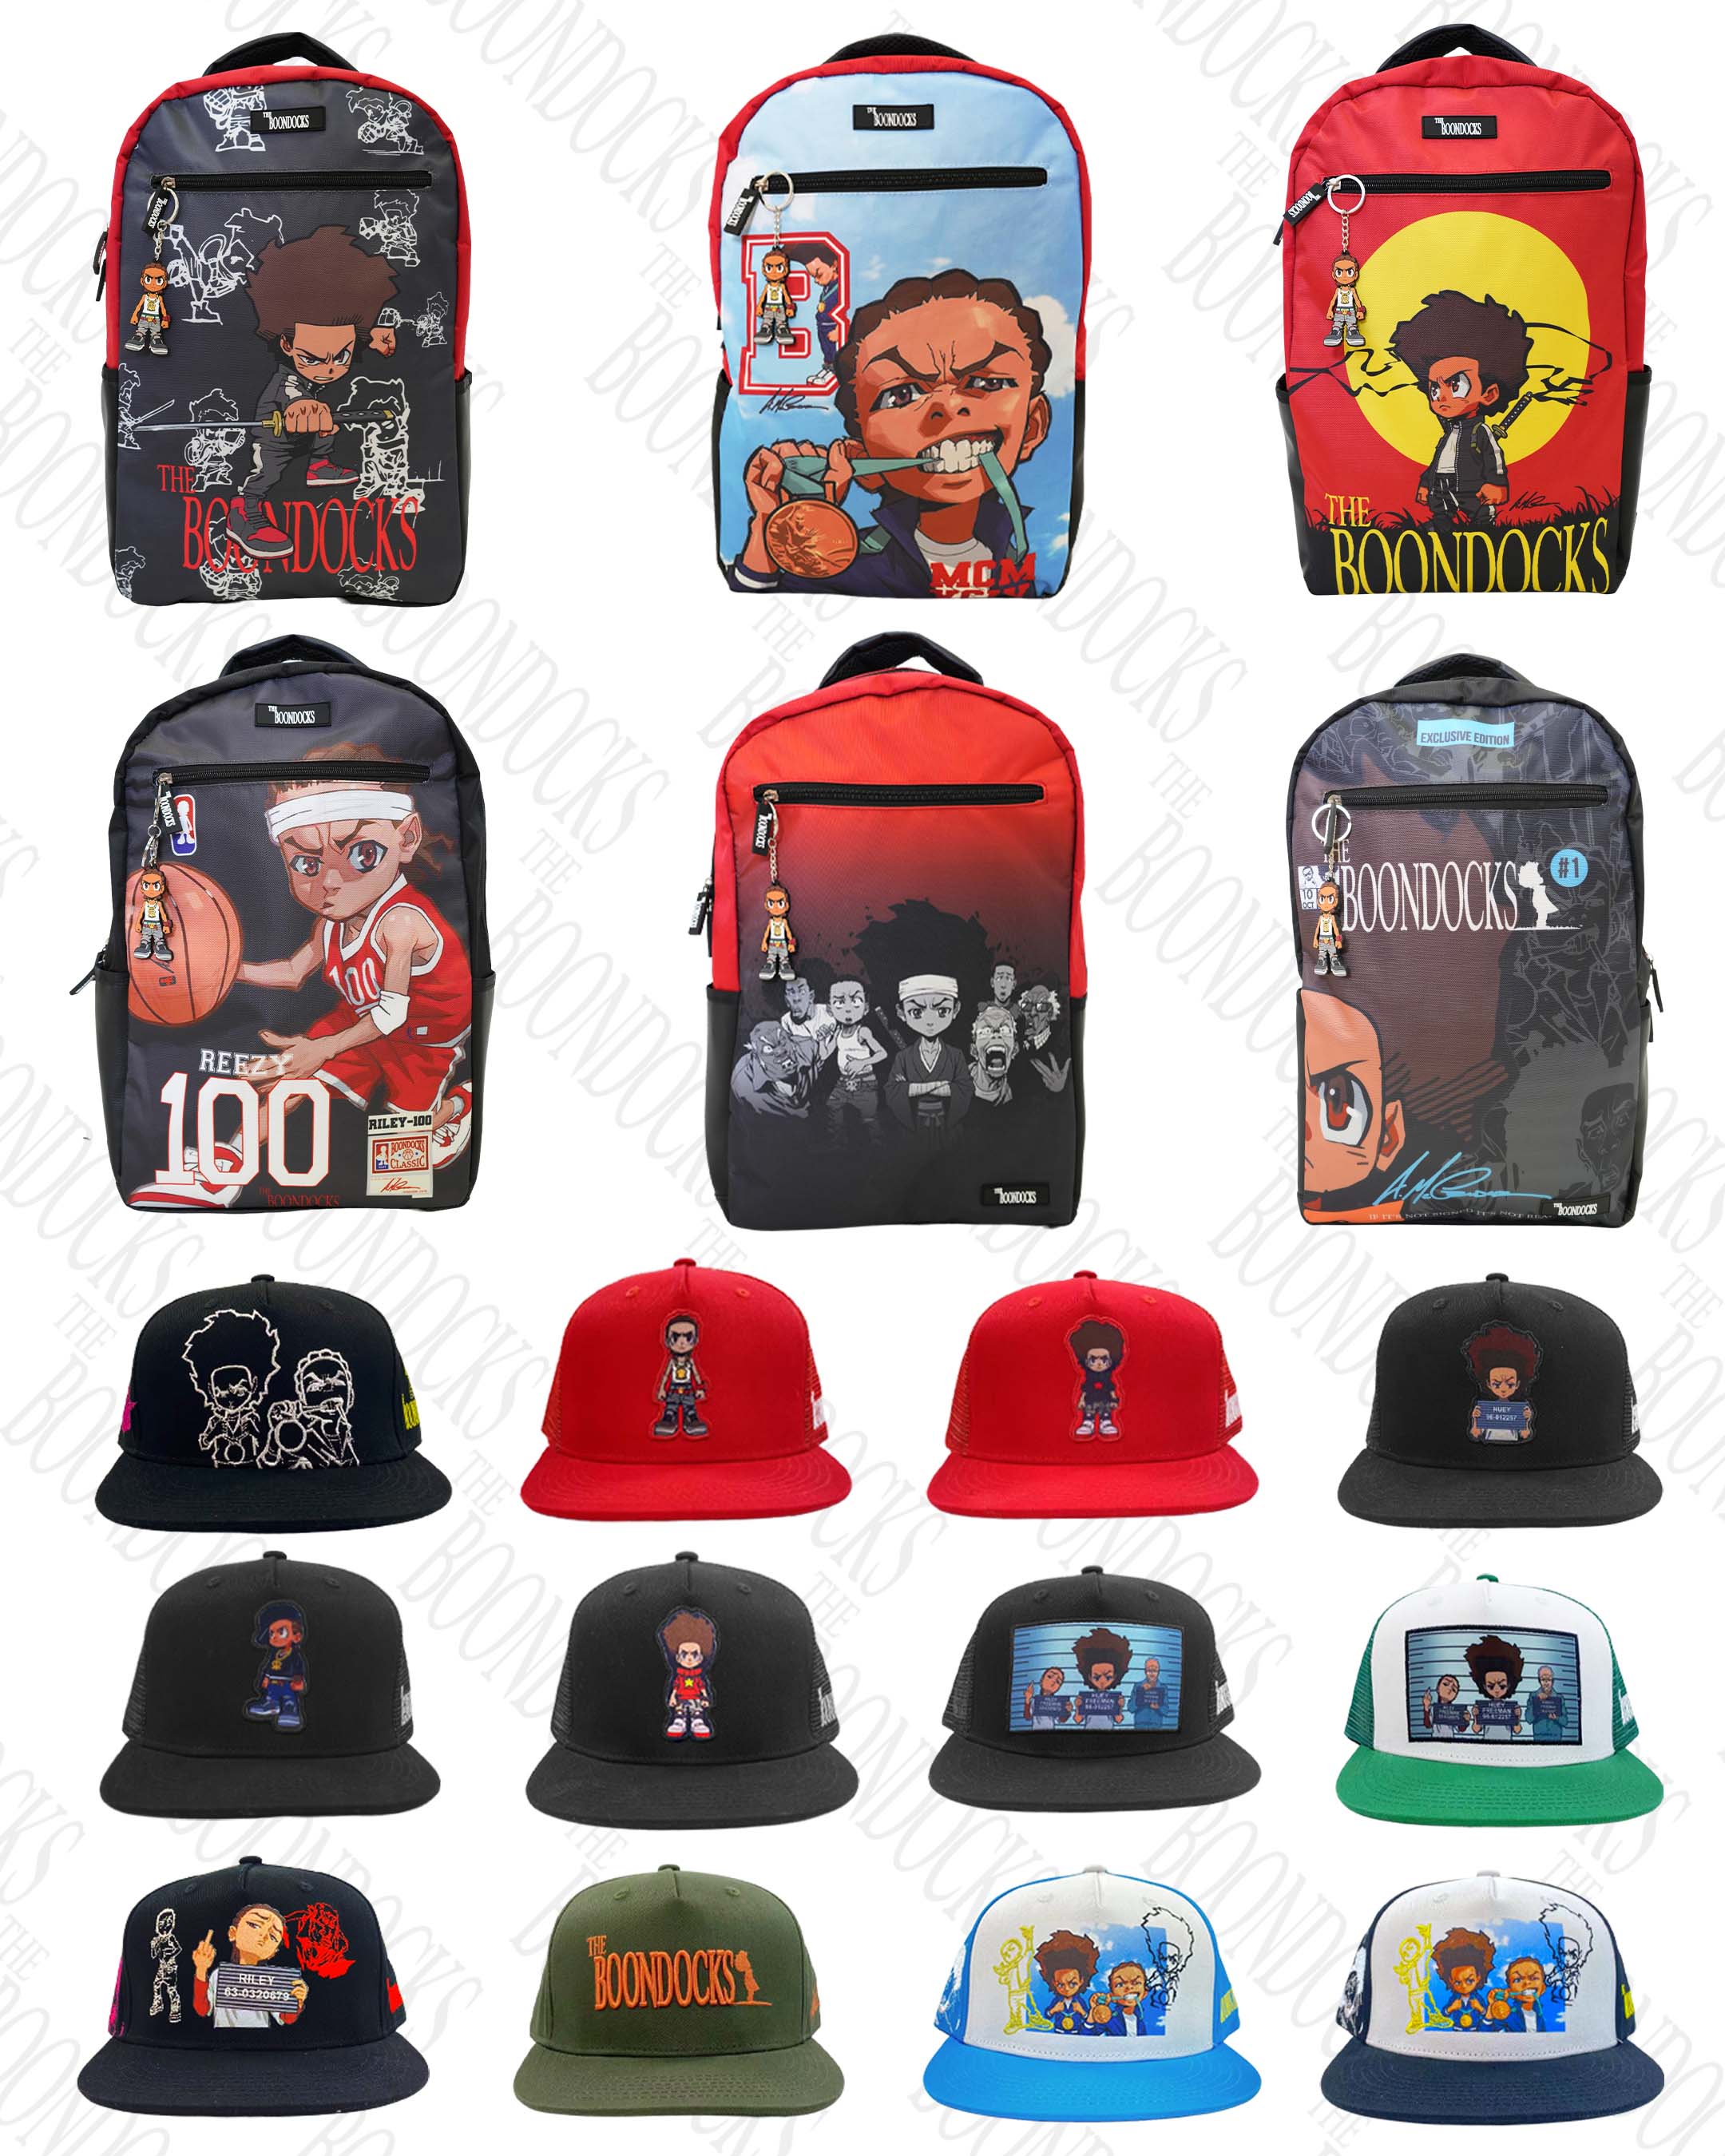 The Boondocks Collectibles & Accessories